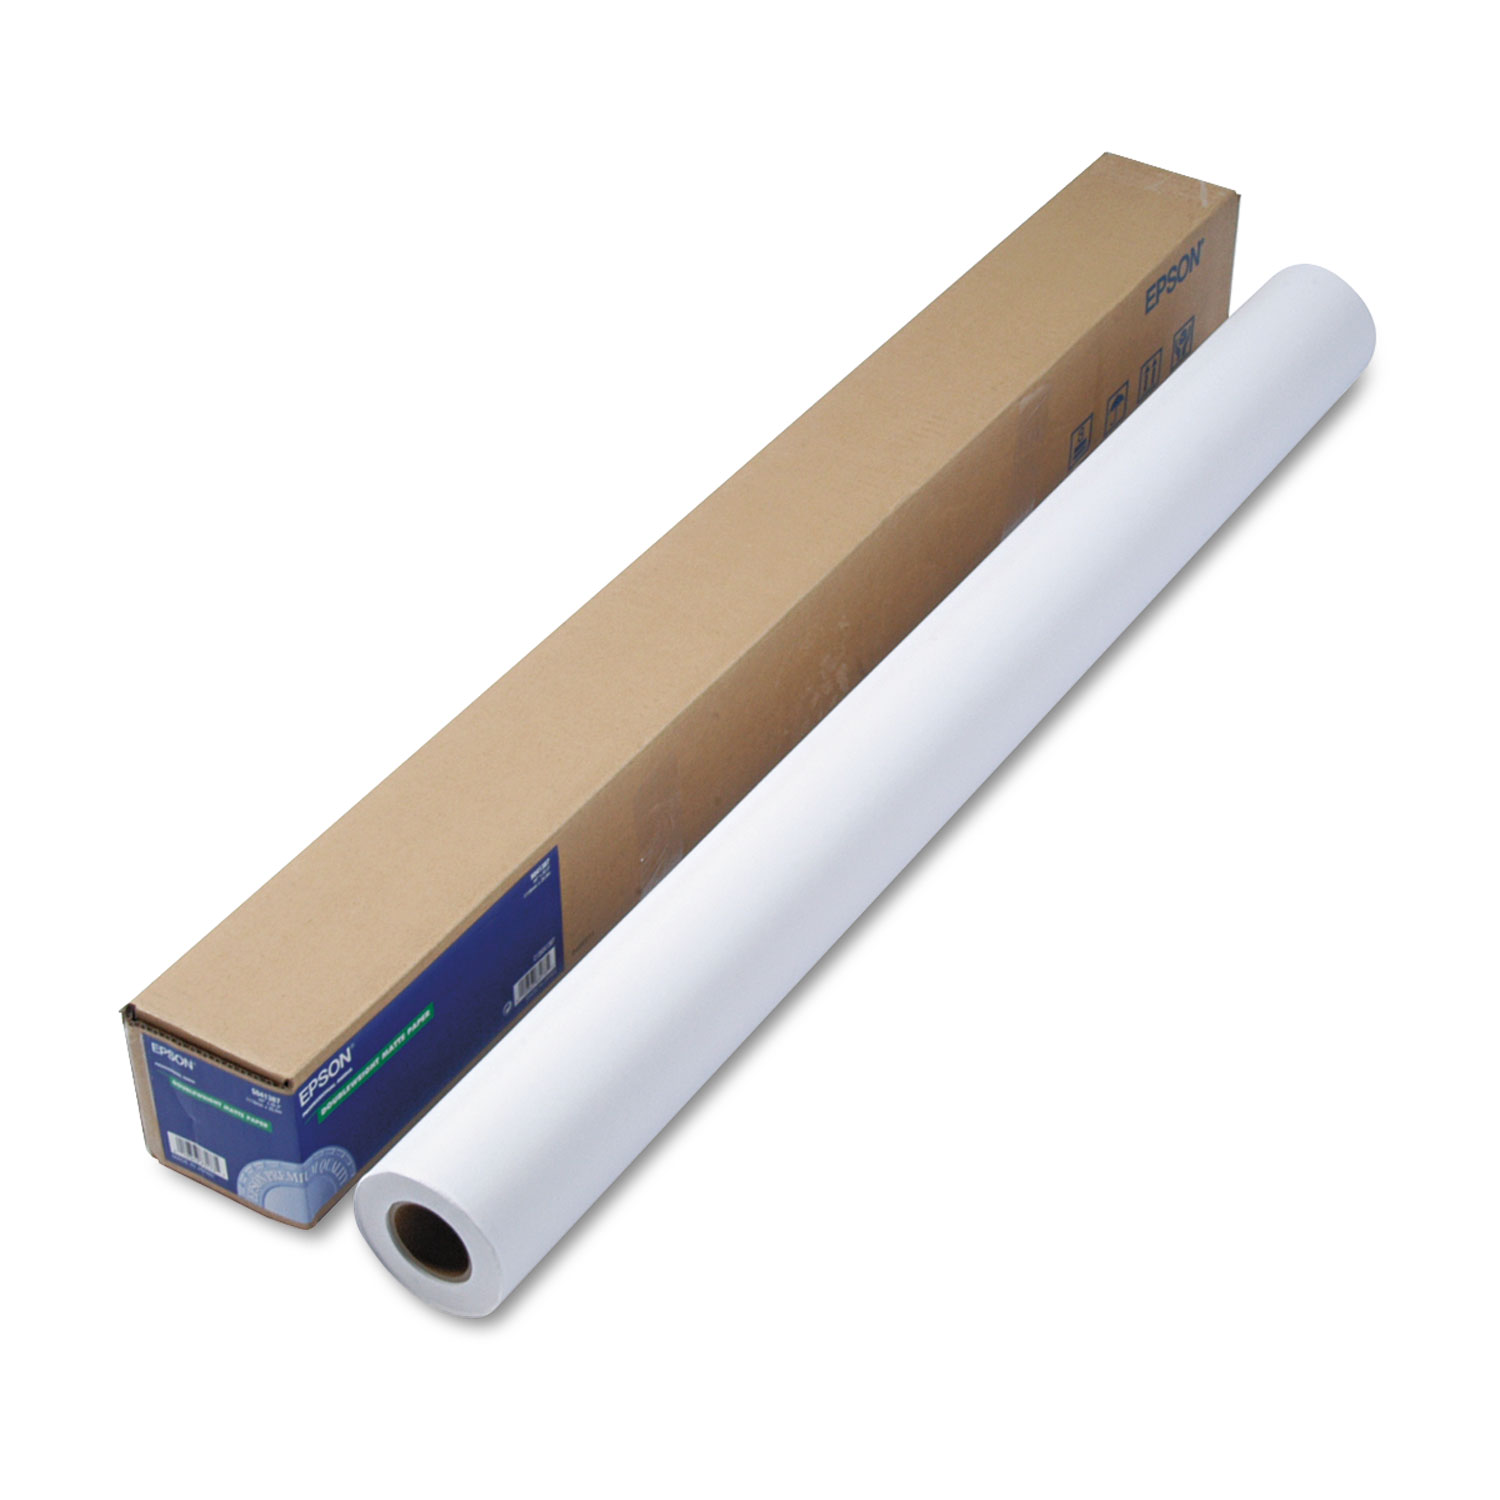  Epson S041387 Double Weight Matte Paper, 8 mil, 44 x 82 ft, Matte White (EPSS041387) 